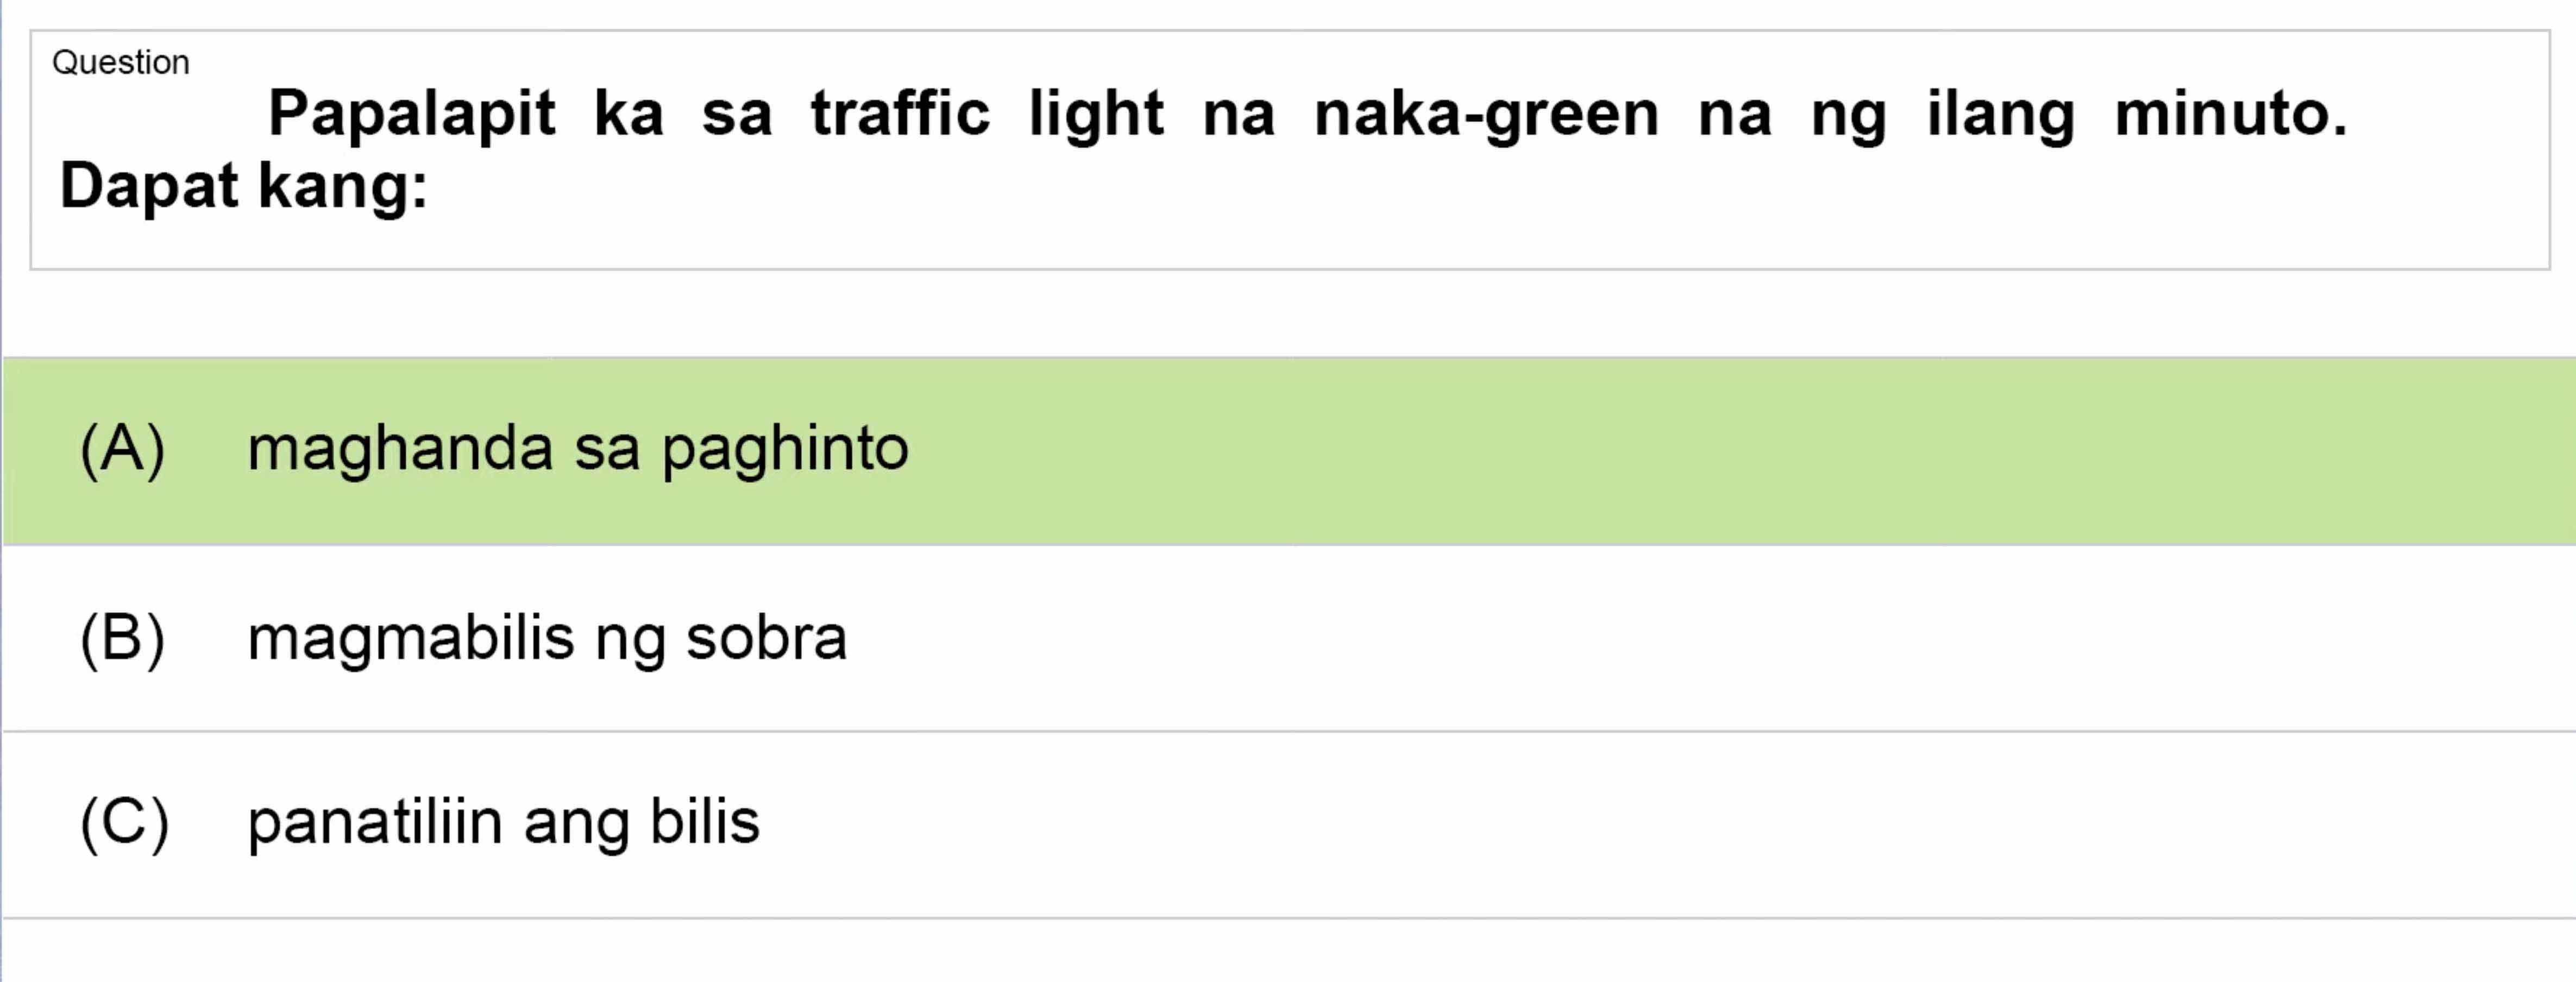 LTO Tagalog non professional exam reviewer light vehicle 1 (43)